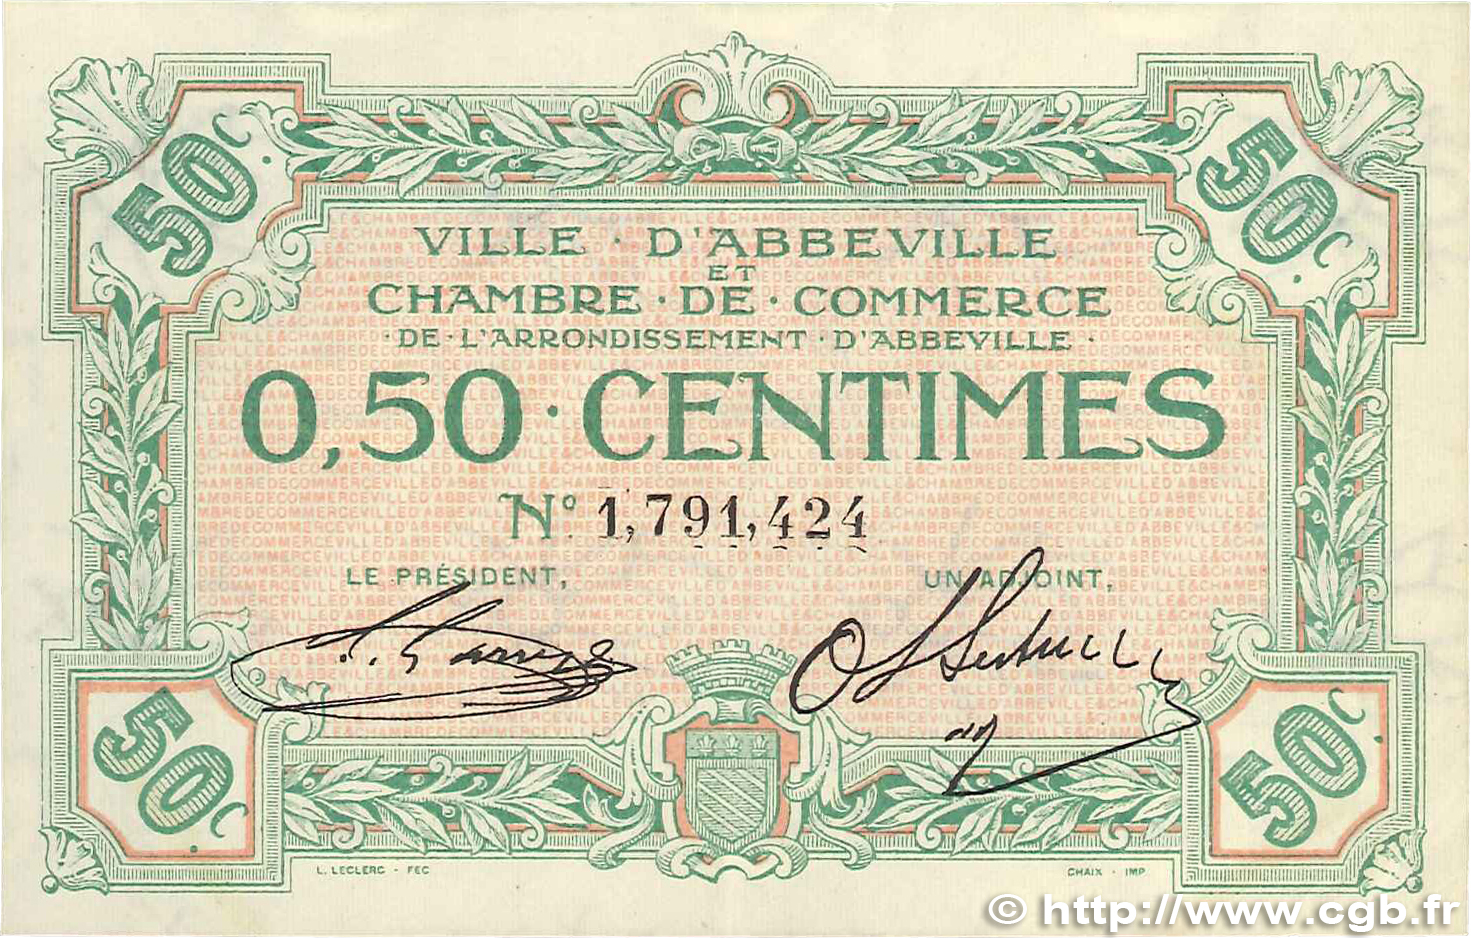 50 Centimes FRANCE regionalism and various Abbeville 1920 JP.001.08 VF+